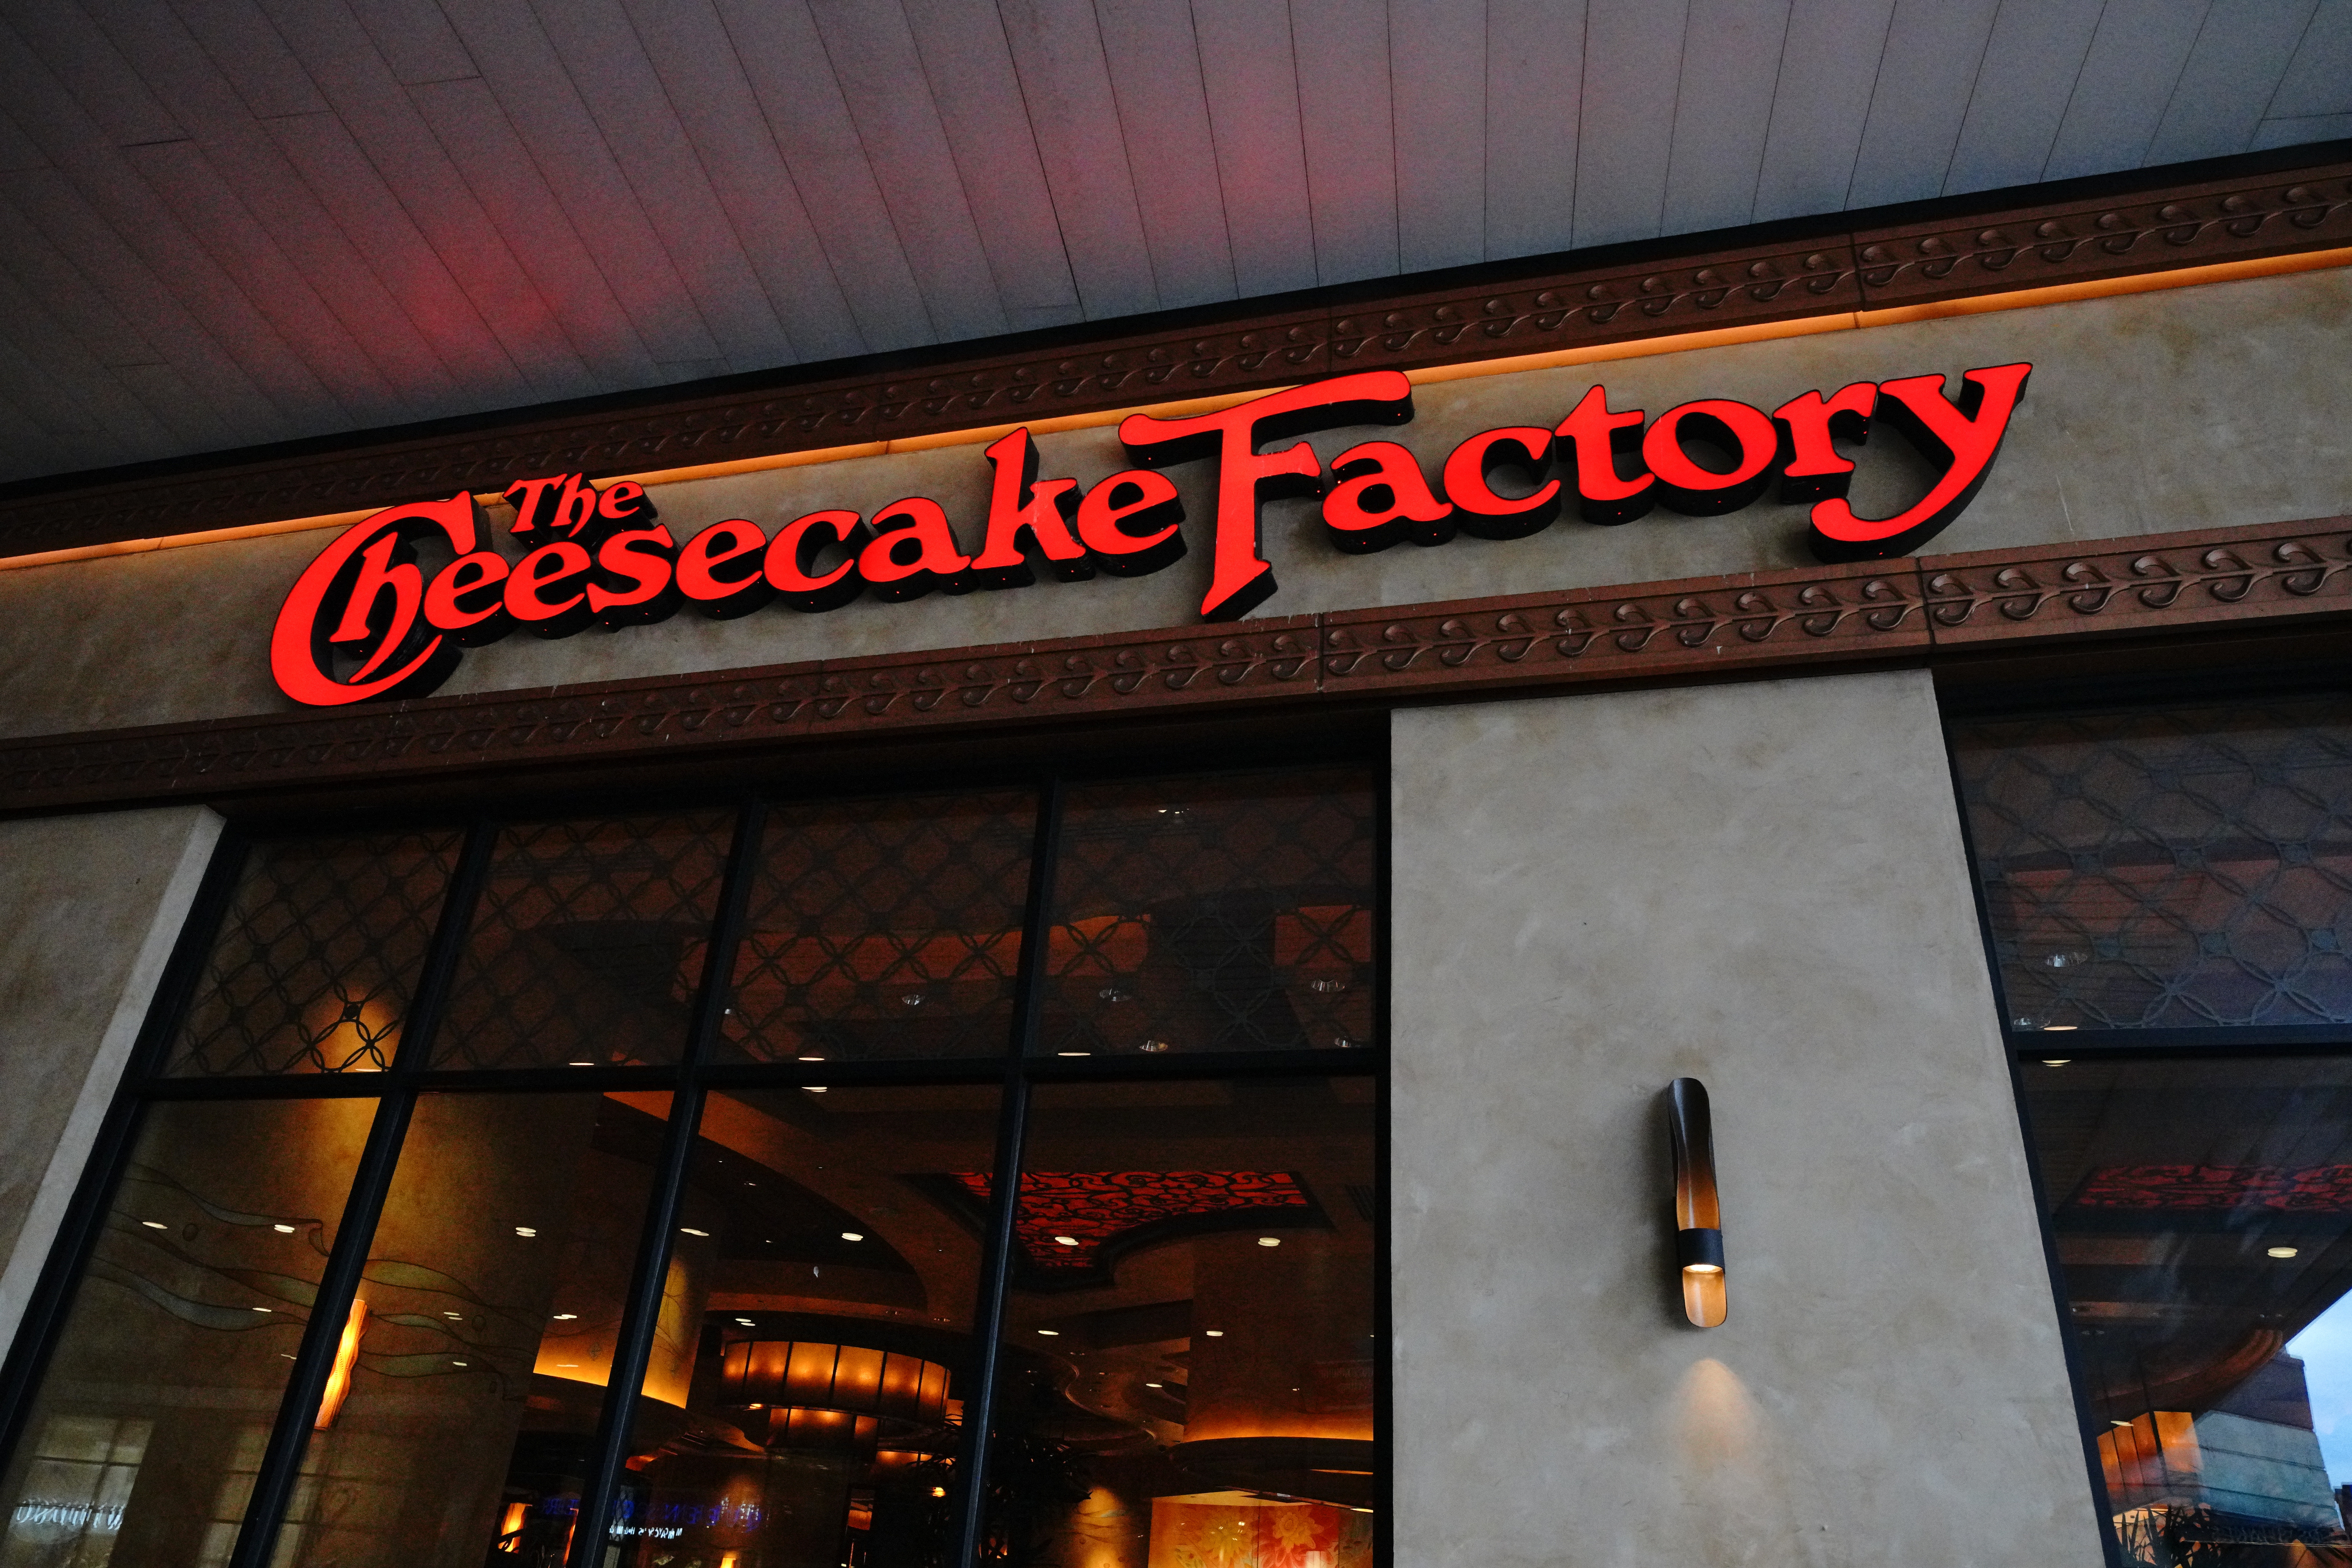 A neon red sign with the Cheesecake Factory logo.